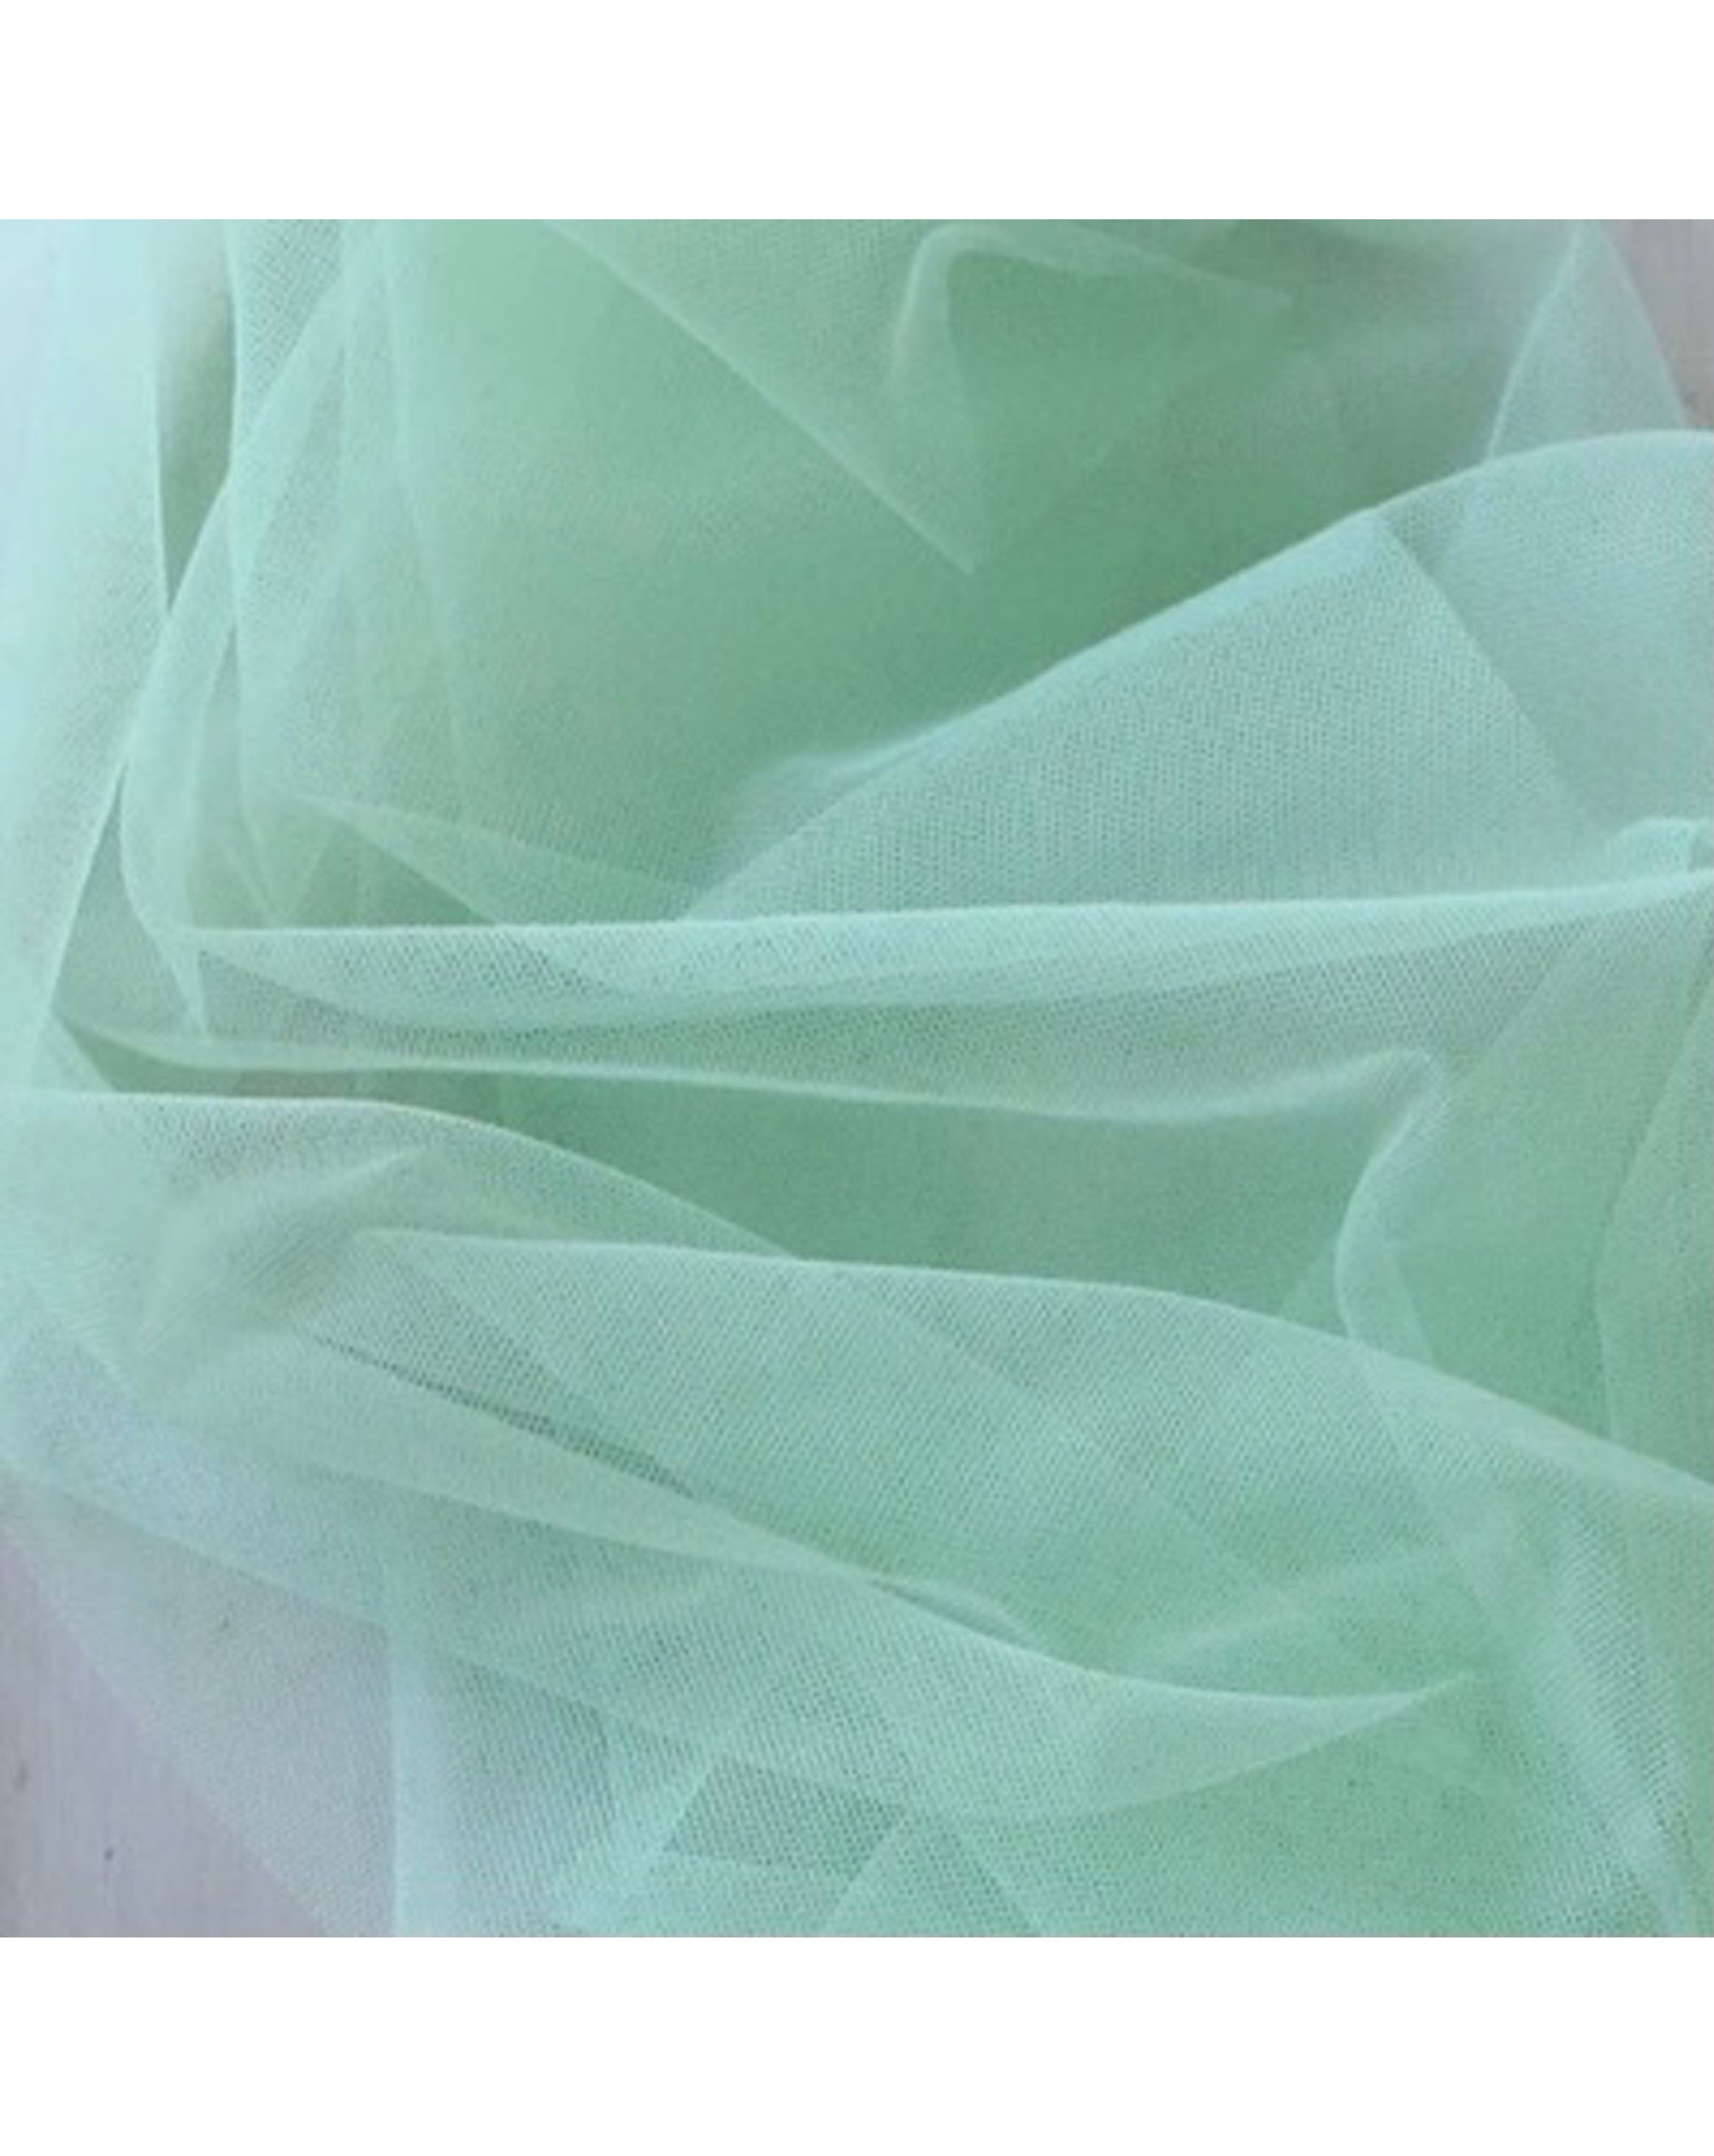 Close up of Rubies Bras Mint Tulle.